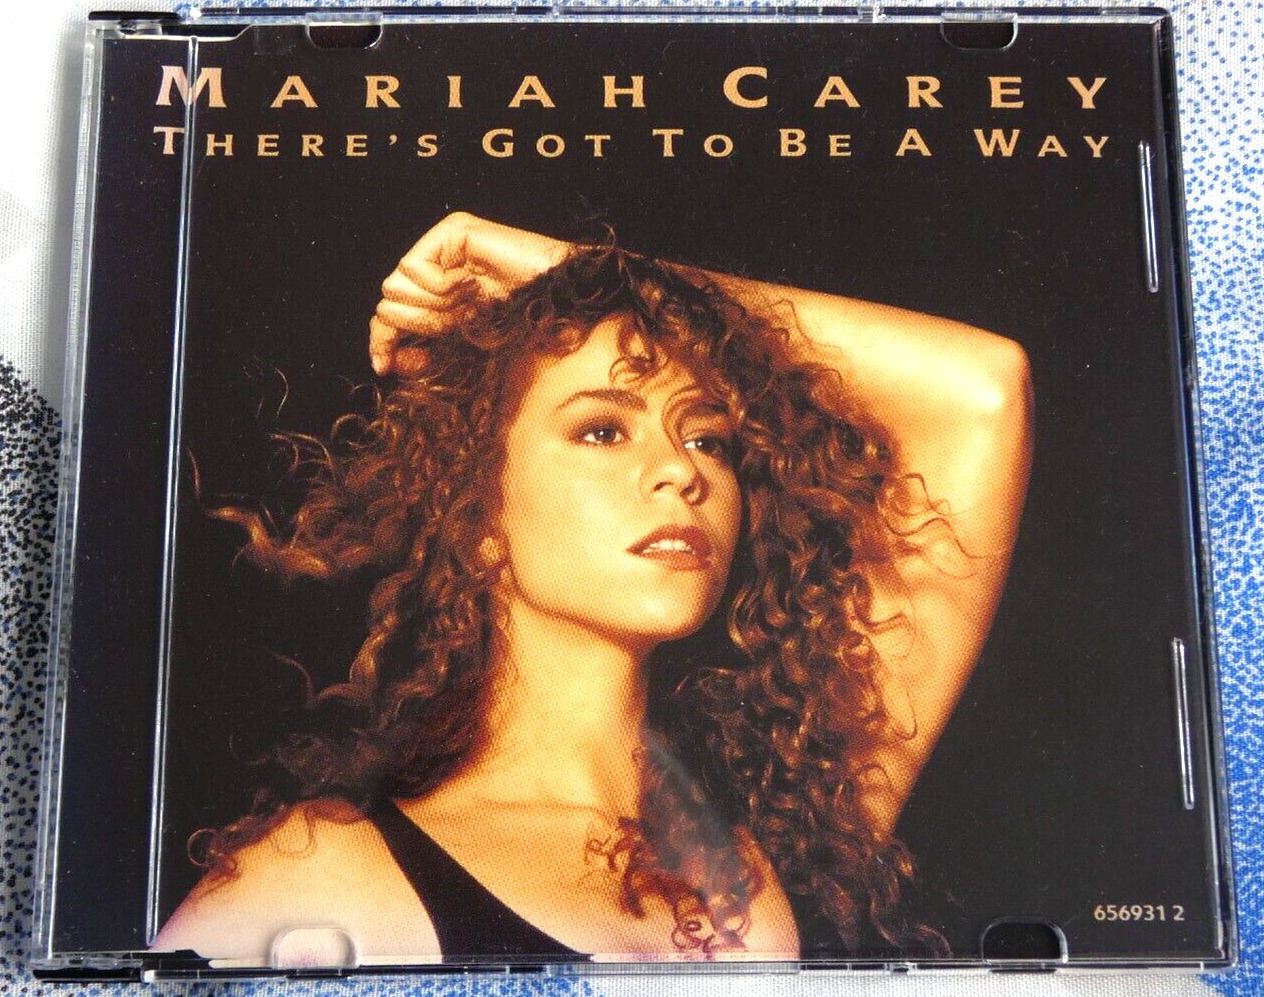 MARIAH CAREY - There's Got To Be A Way - CD Single